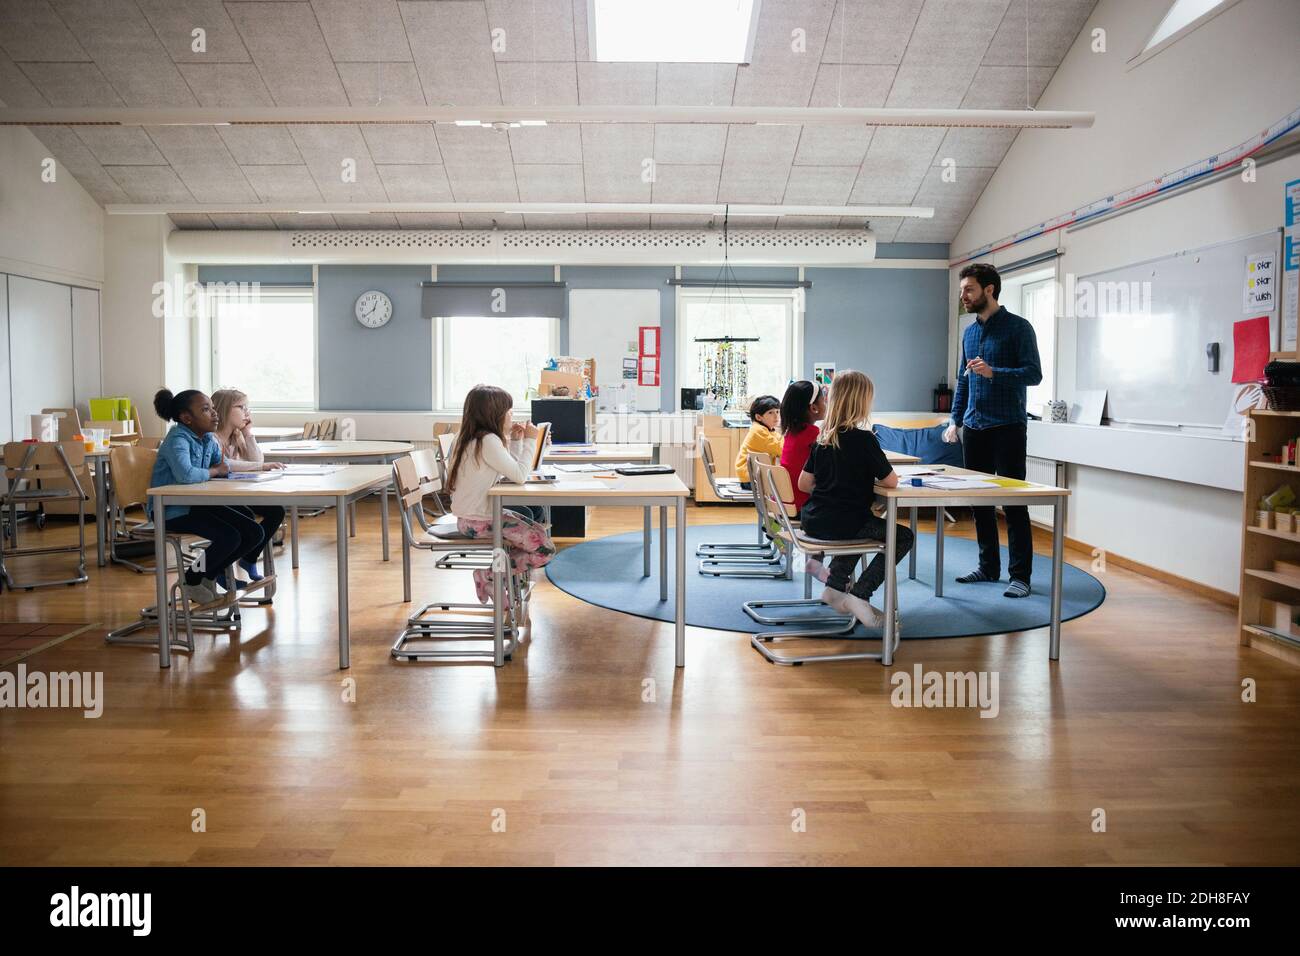 Teacher teaching students in brightly lit classroom at school Stock Photo